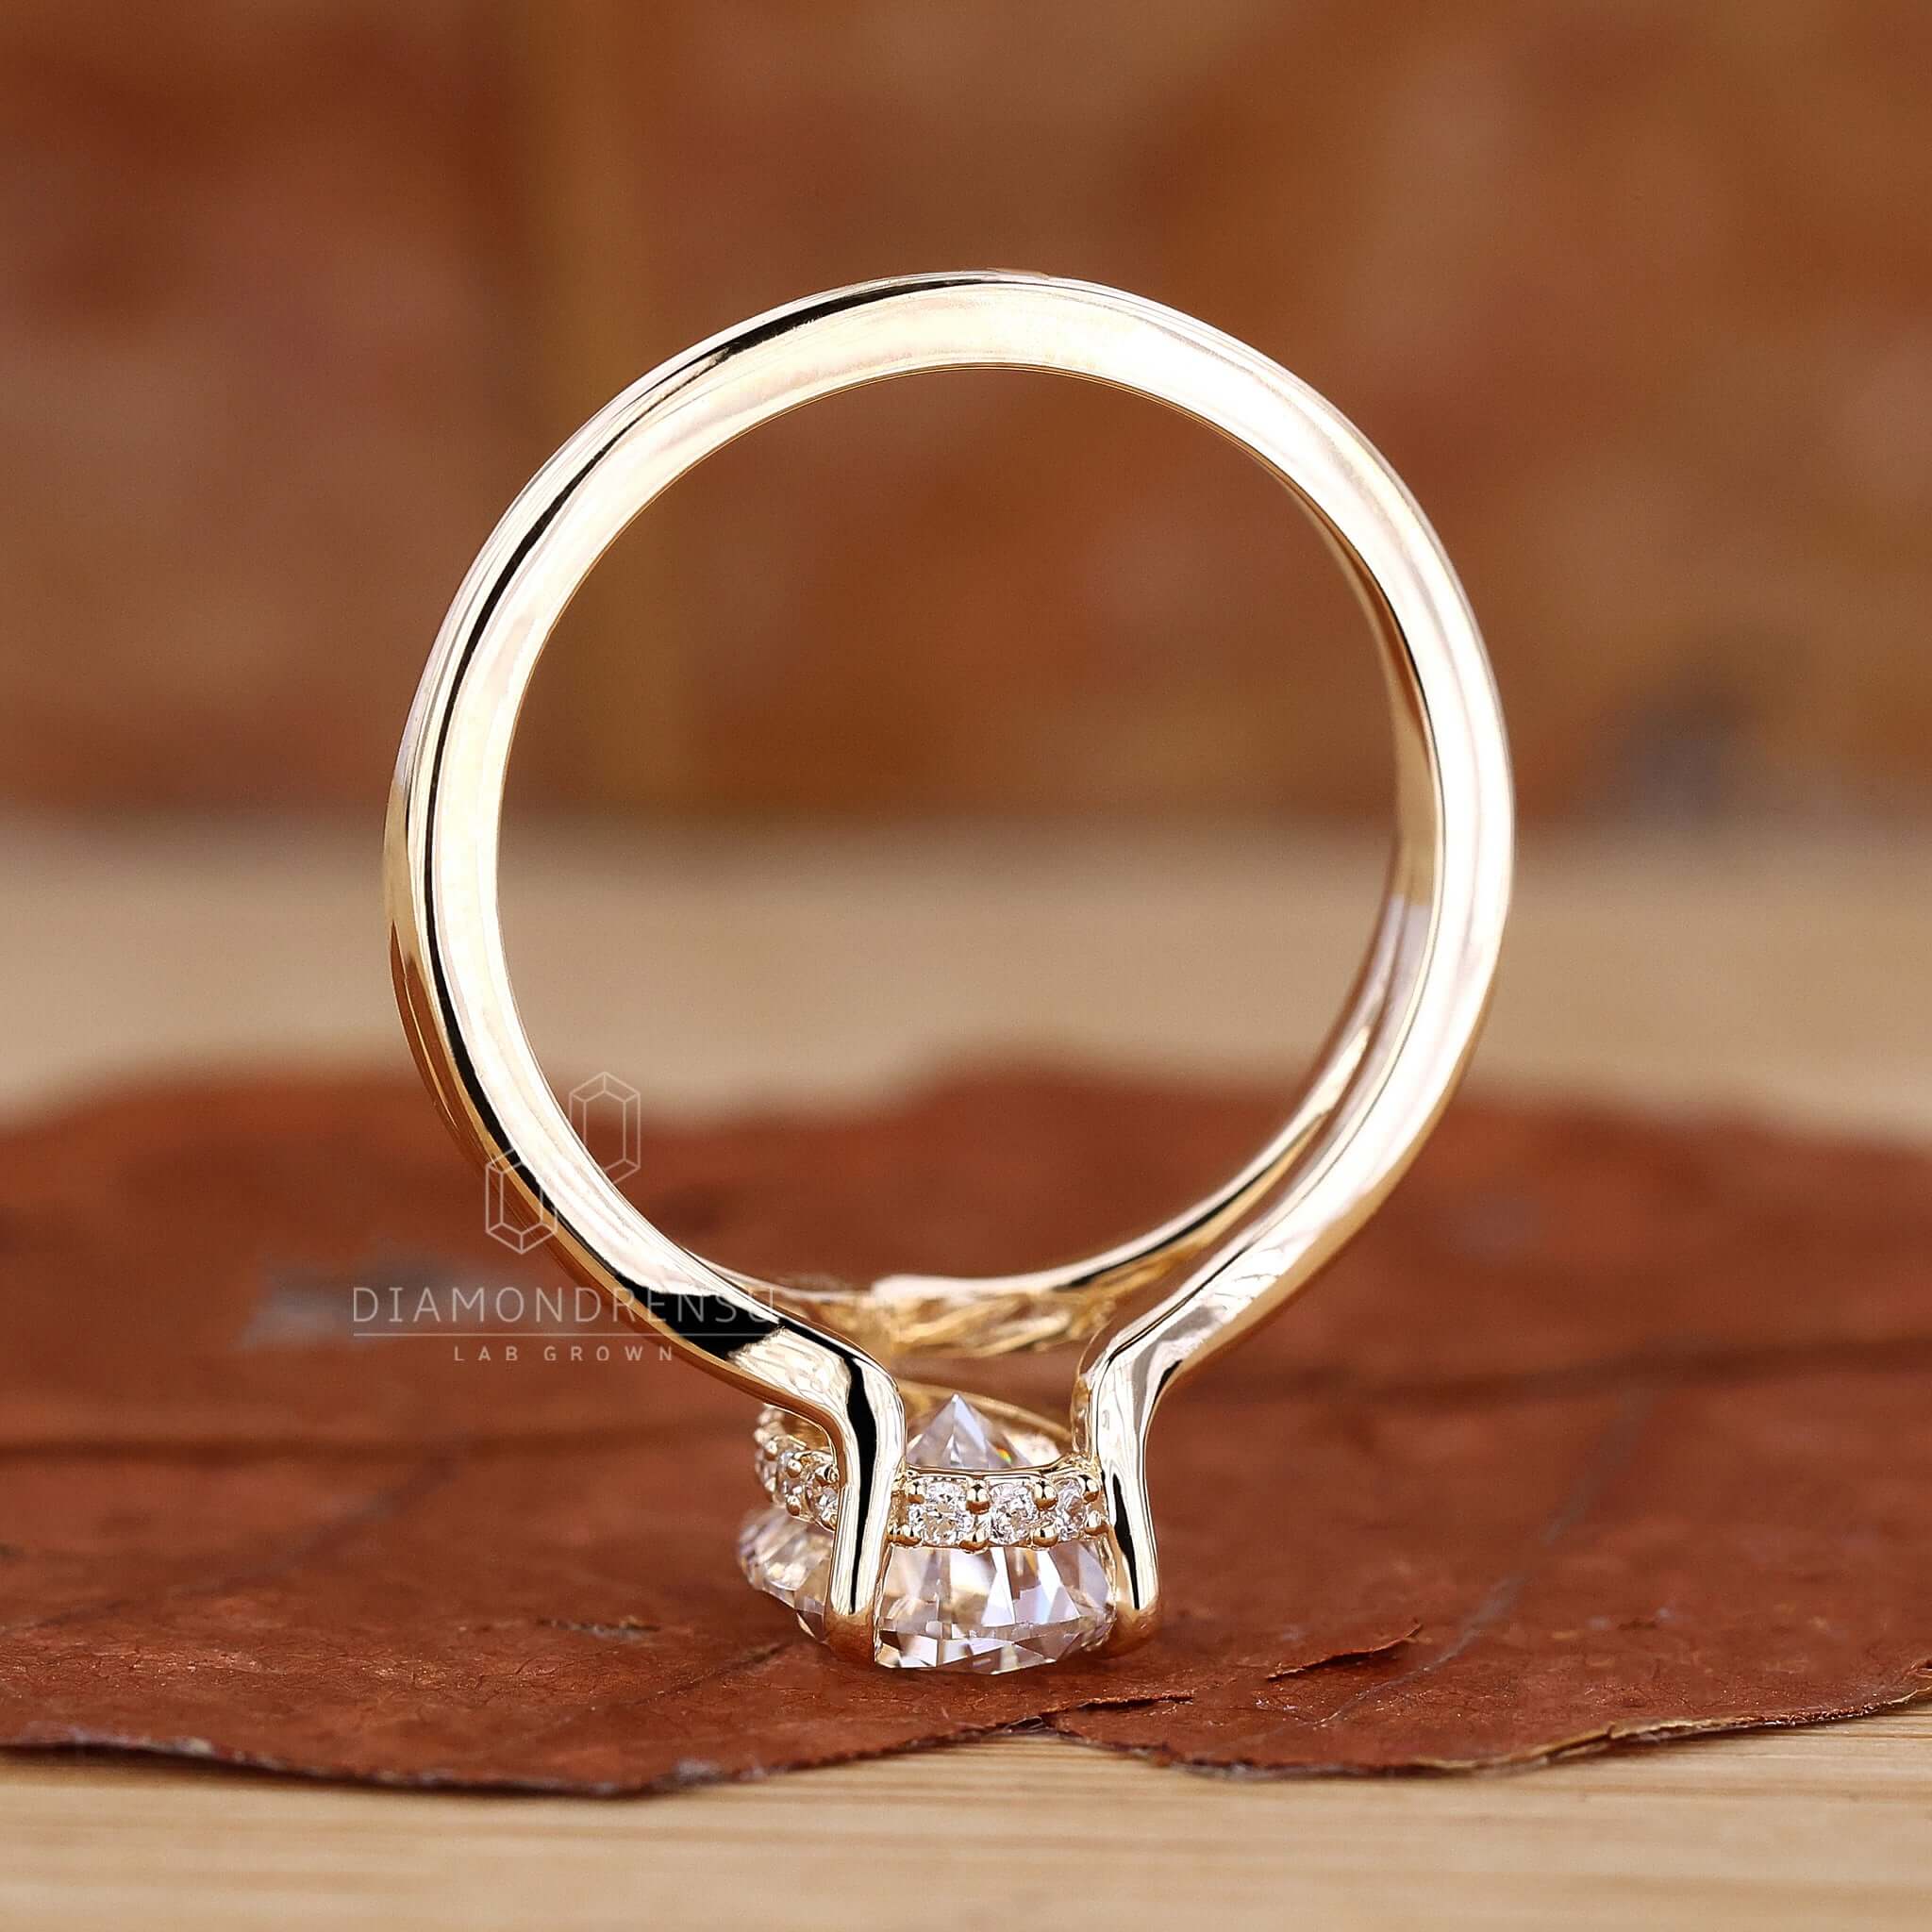 A dazzling Pear Halo Engagement Ring, perfect for celebrating love.